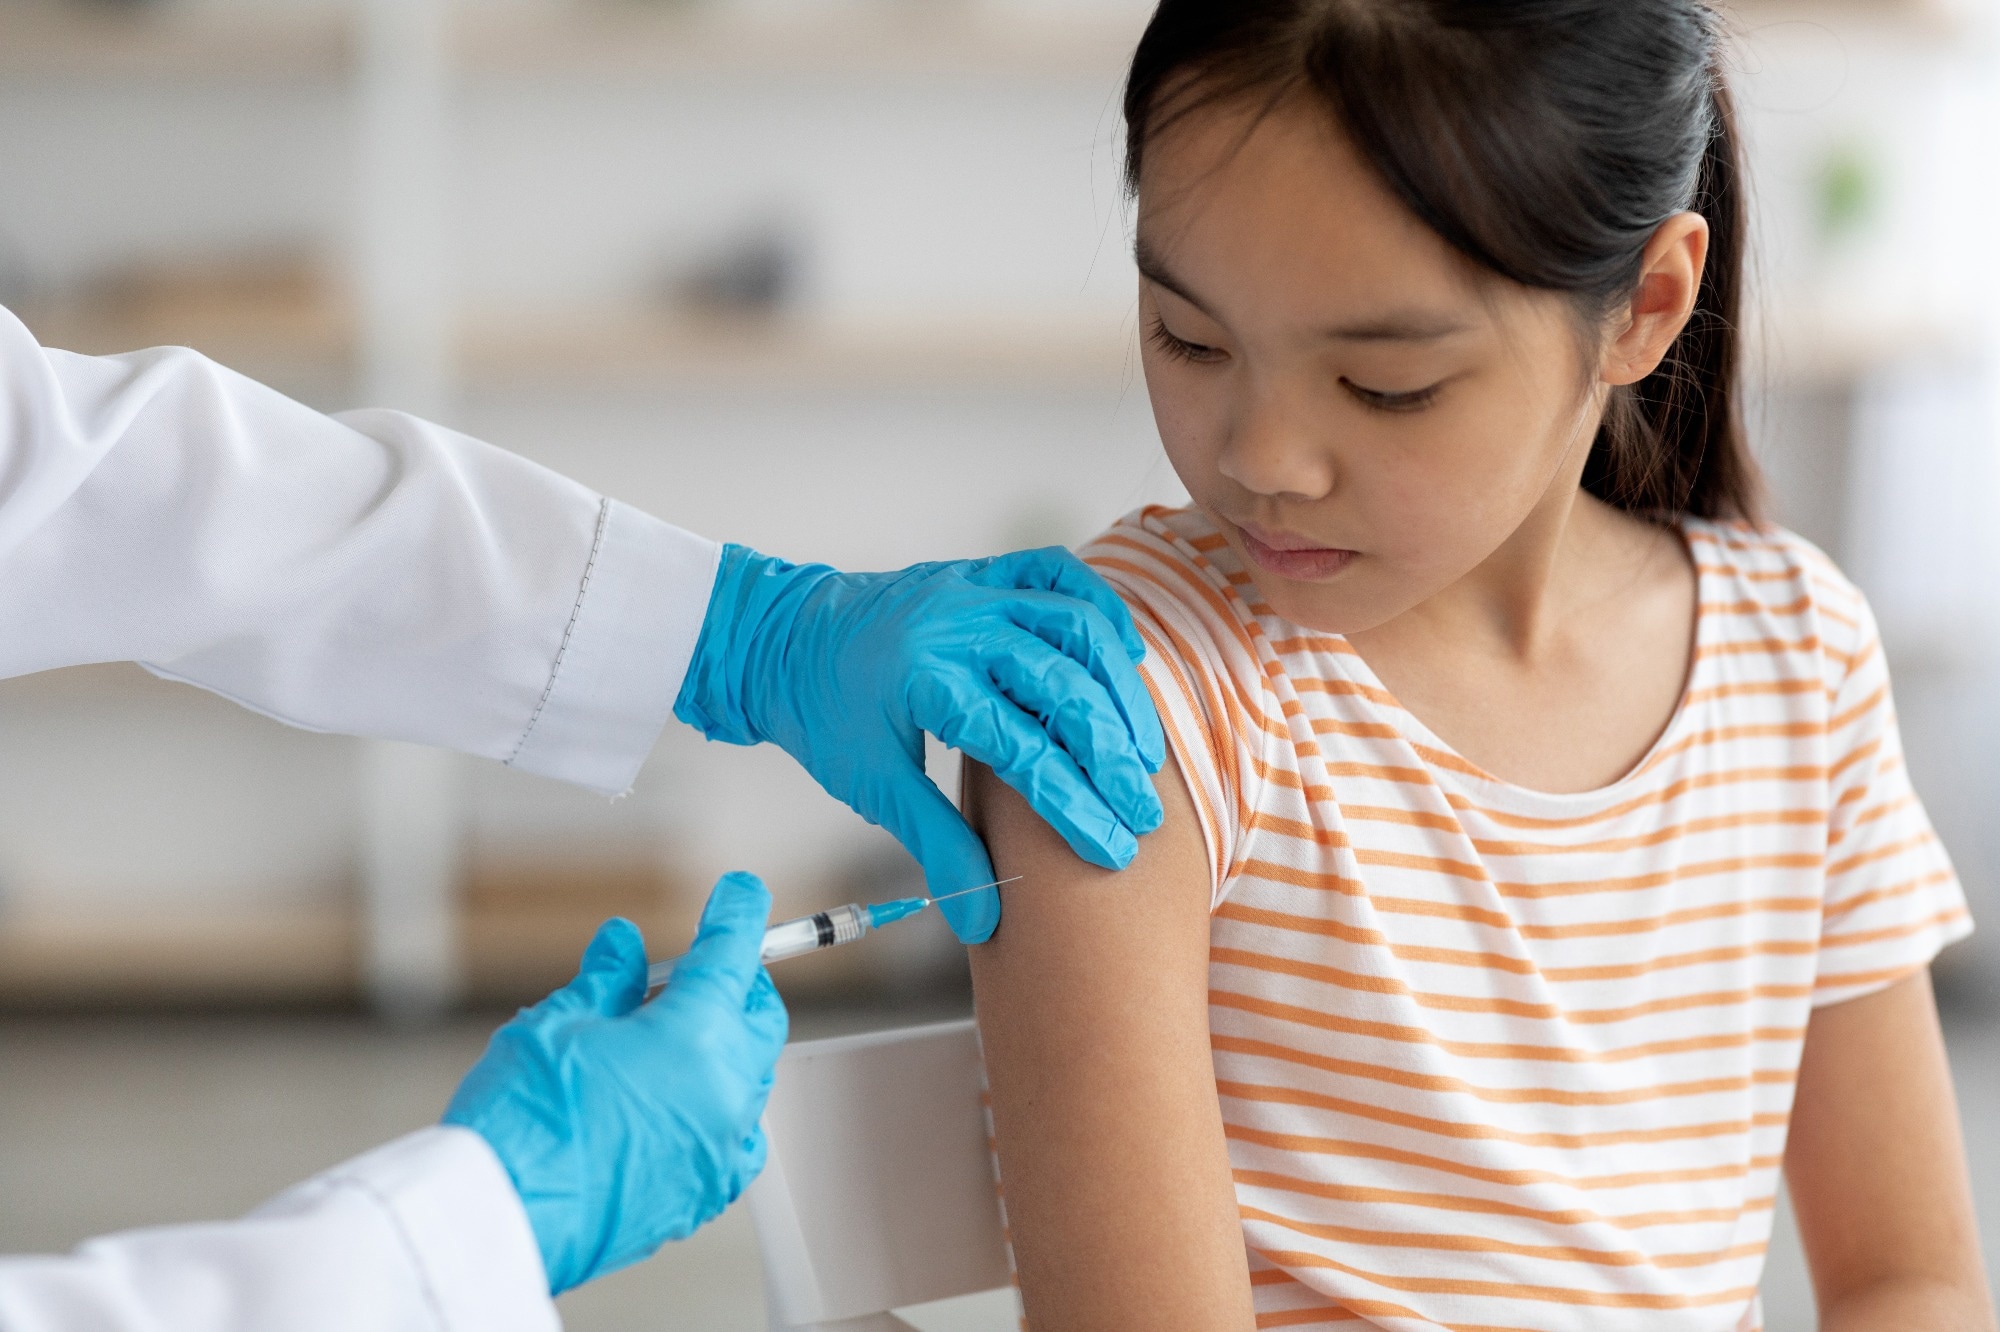 Study: COVID-19 Vaccination and Incidence of Pediatric SARS-CoV-2 Infection and Hospitalization. Image Credit: Prostock-studio/Shutterstock.com